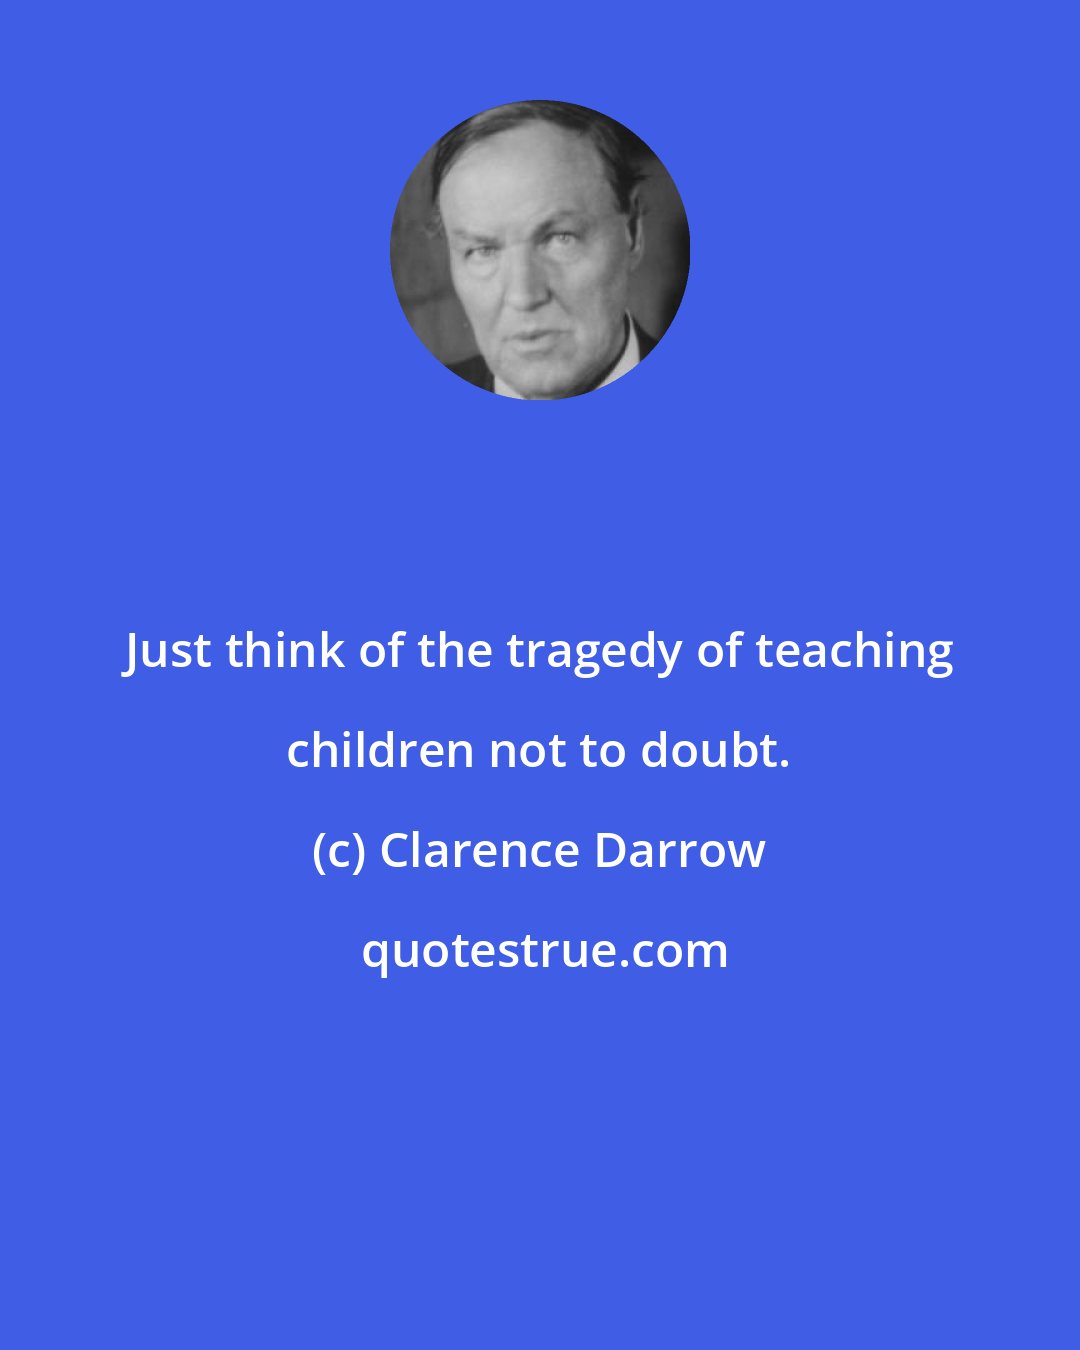 Clarence Darrow: Just think of the tragedy of teaching children not to doubt.